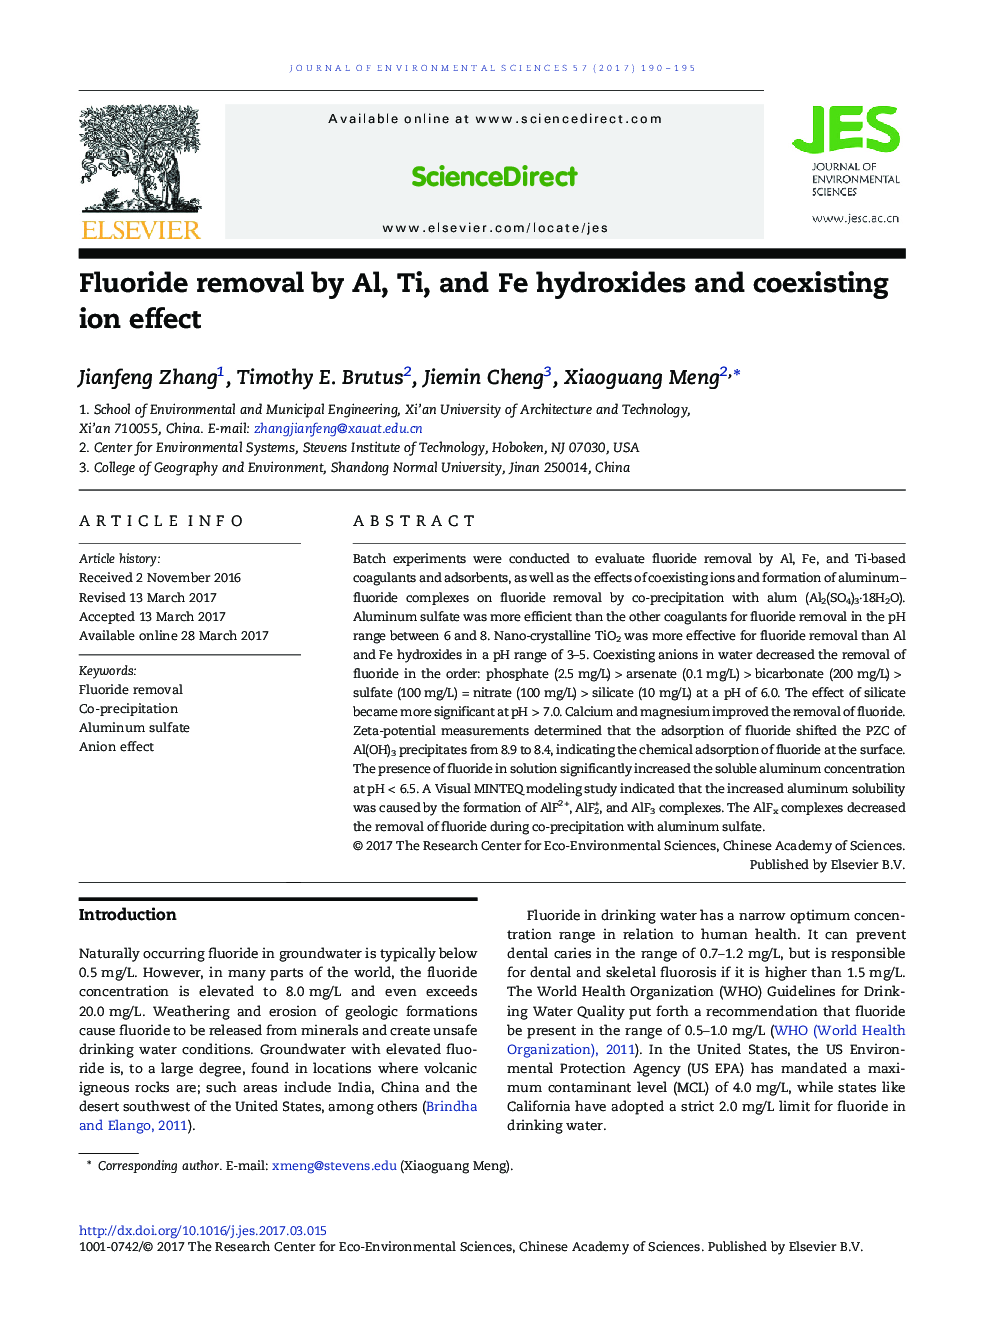 Fluoride removal by Al, Ti, and Fe hydroxides and coexisting ion effect